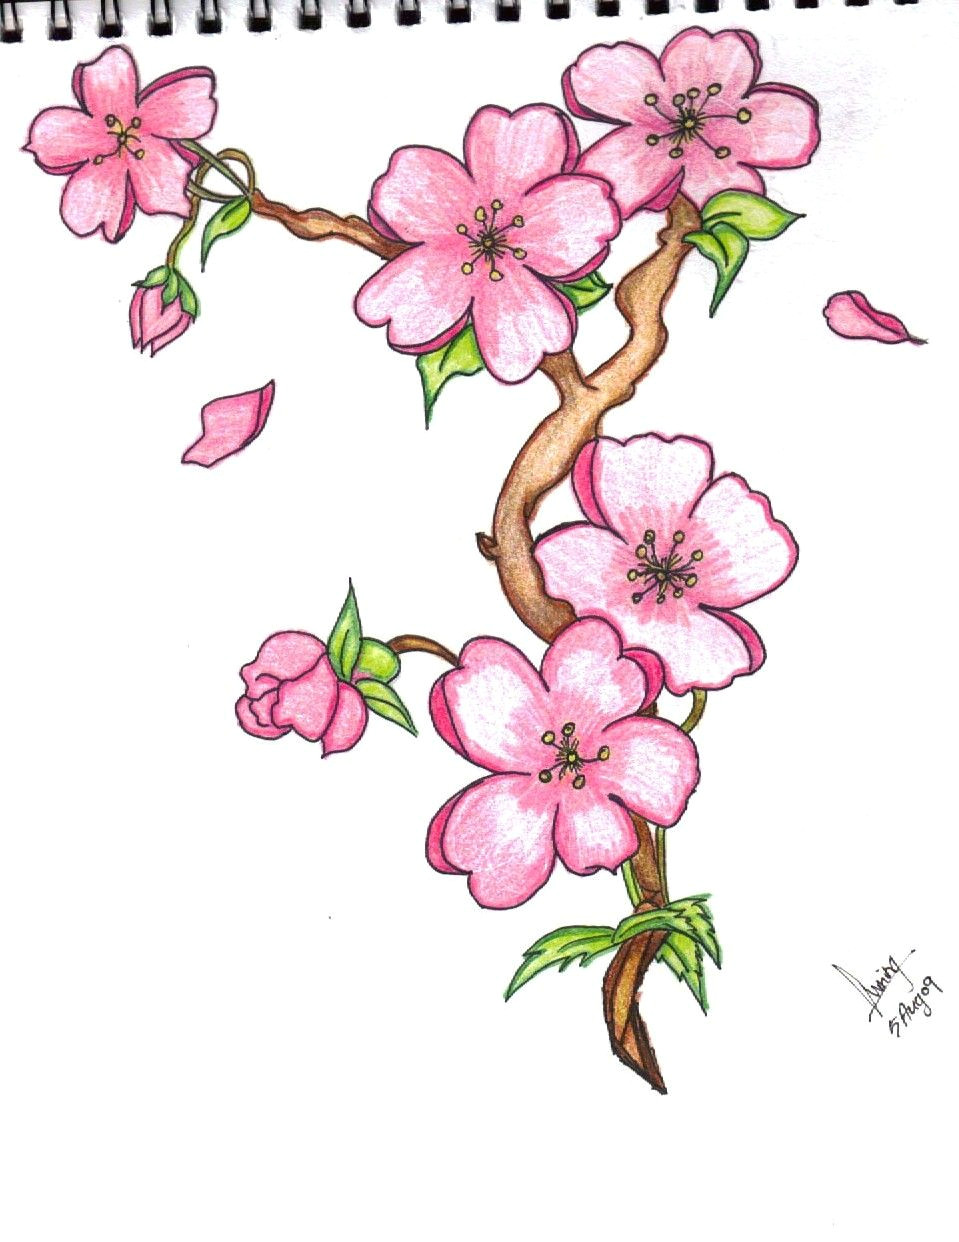 flower drawings a beautiful flower always makes us smile imagine replicating your flowers in the